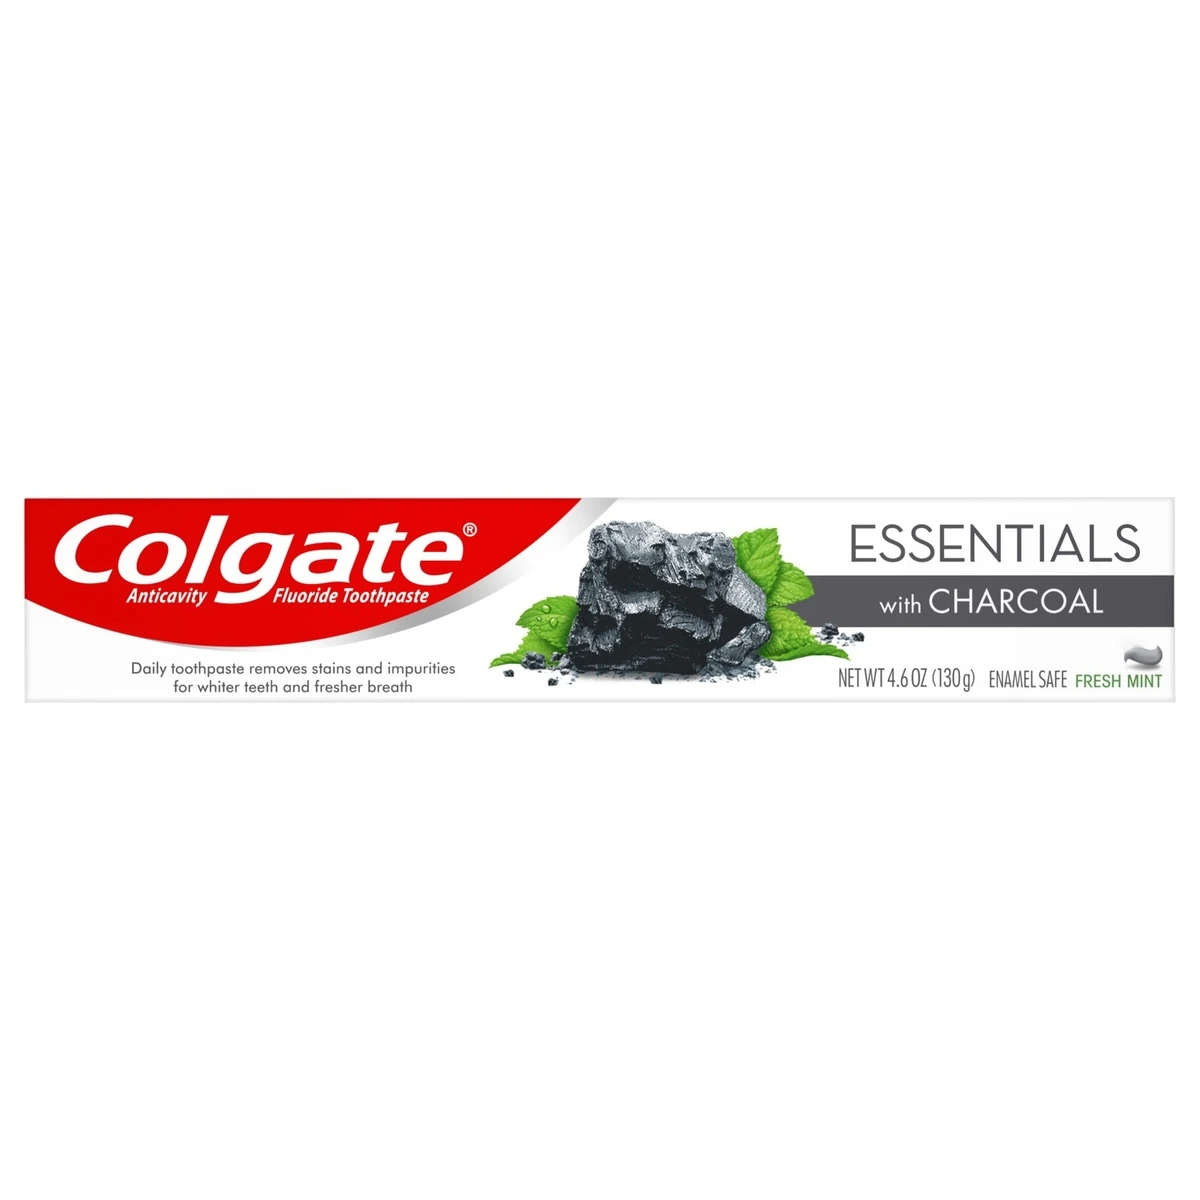 Colgate Teeth Whitening Charcoal Toothpaste  Natural Mint Flavor  4.6oz